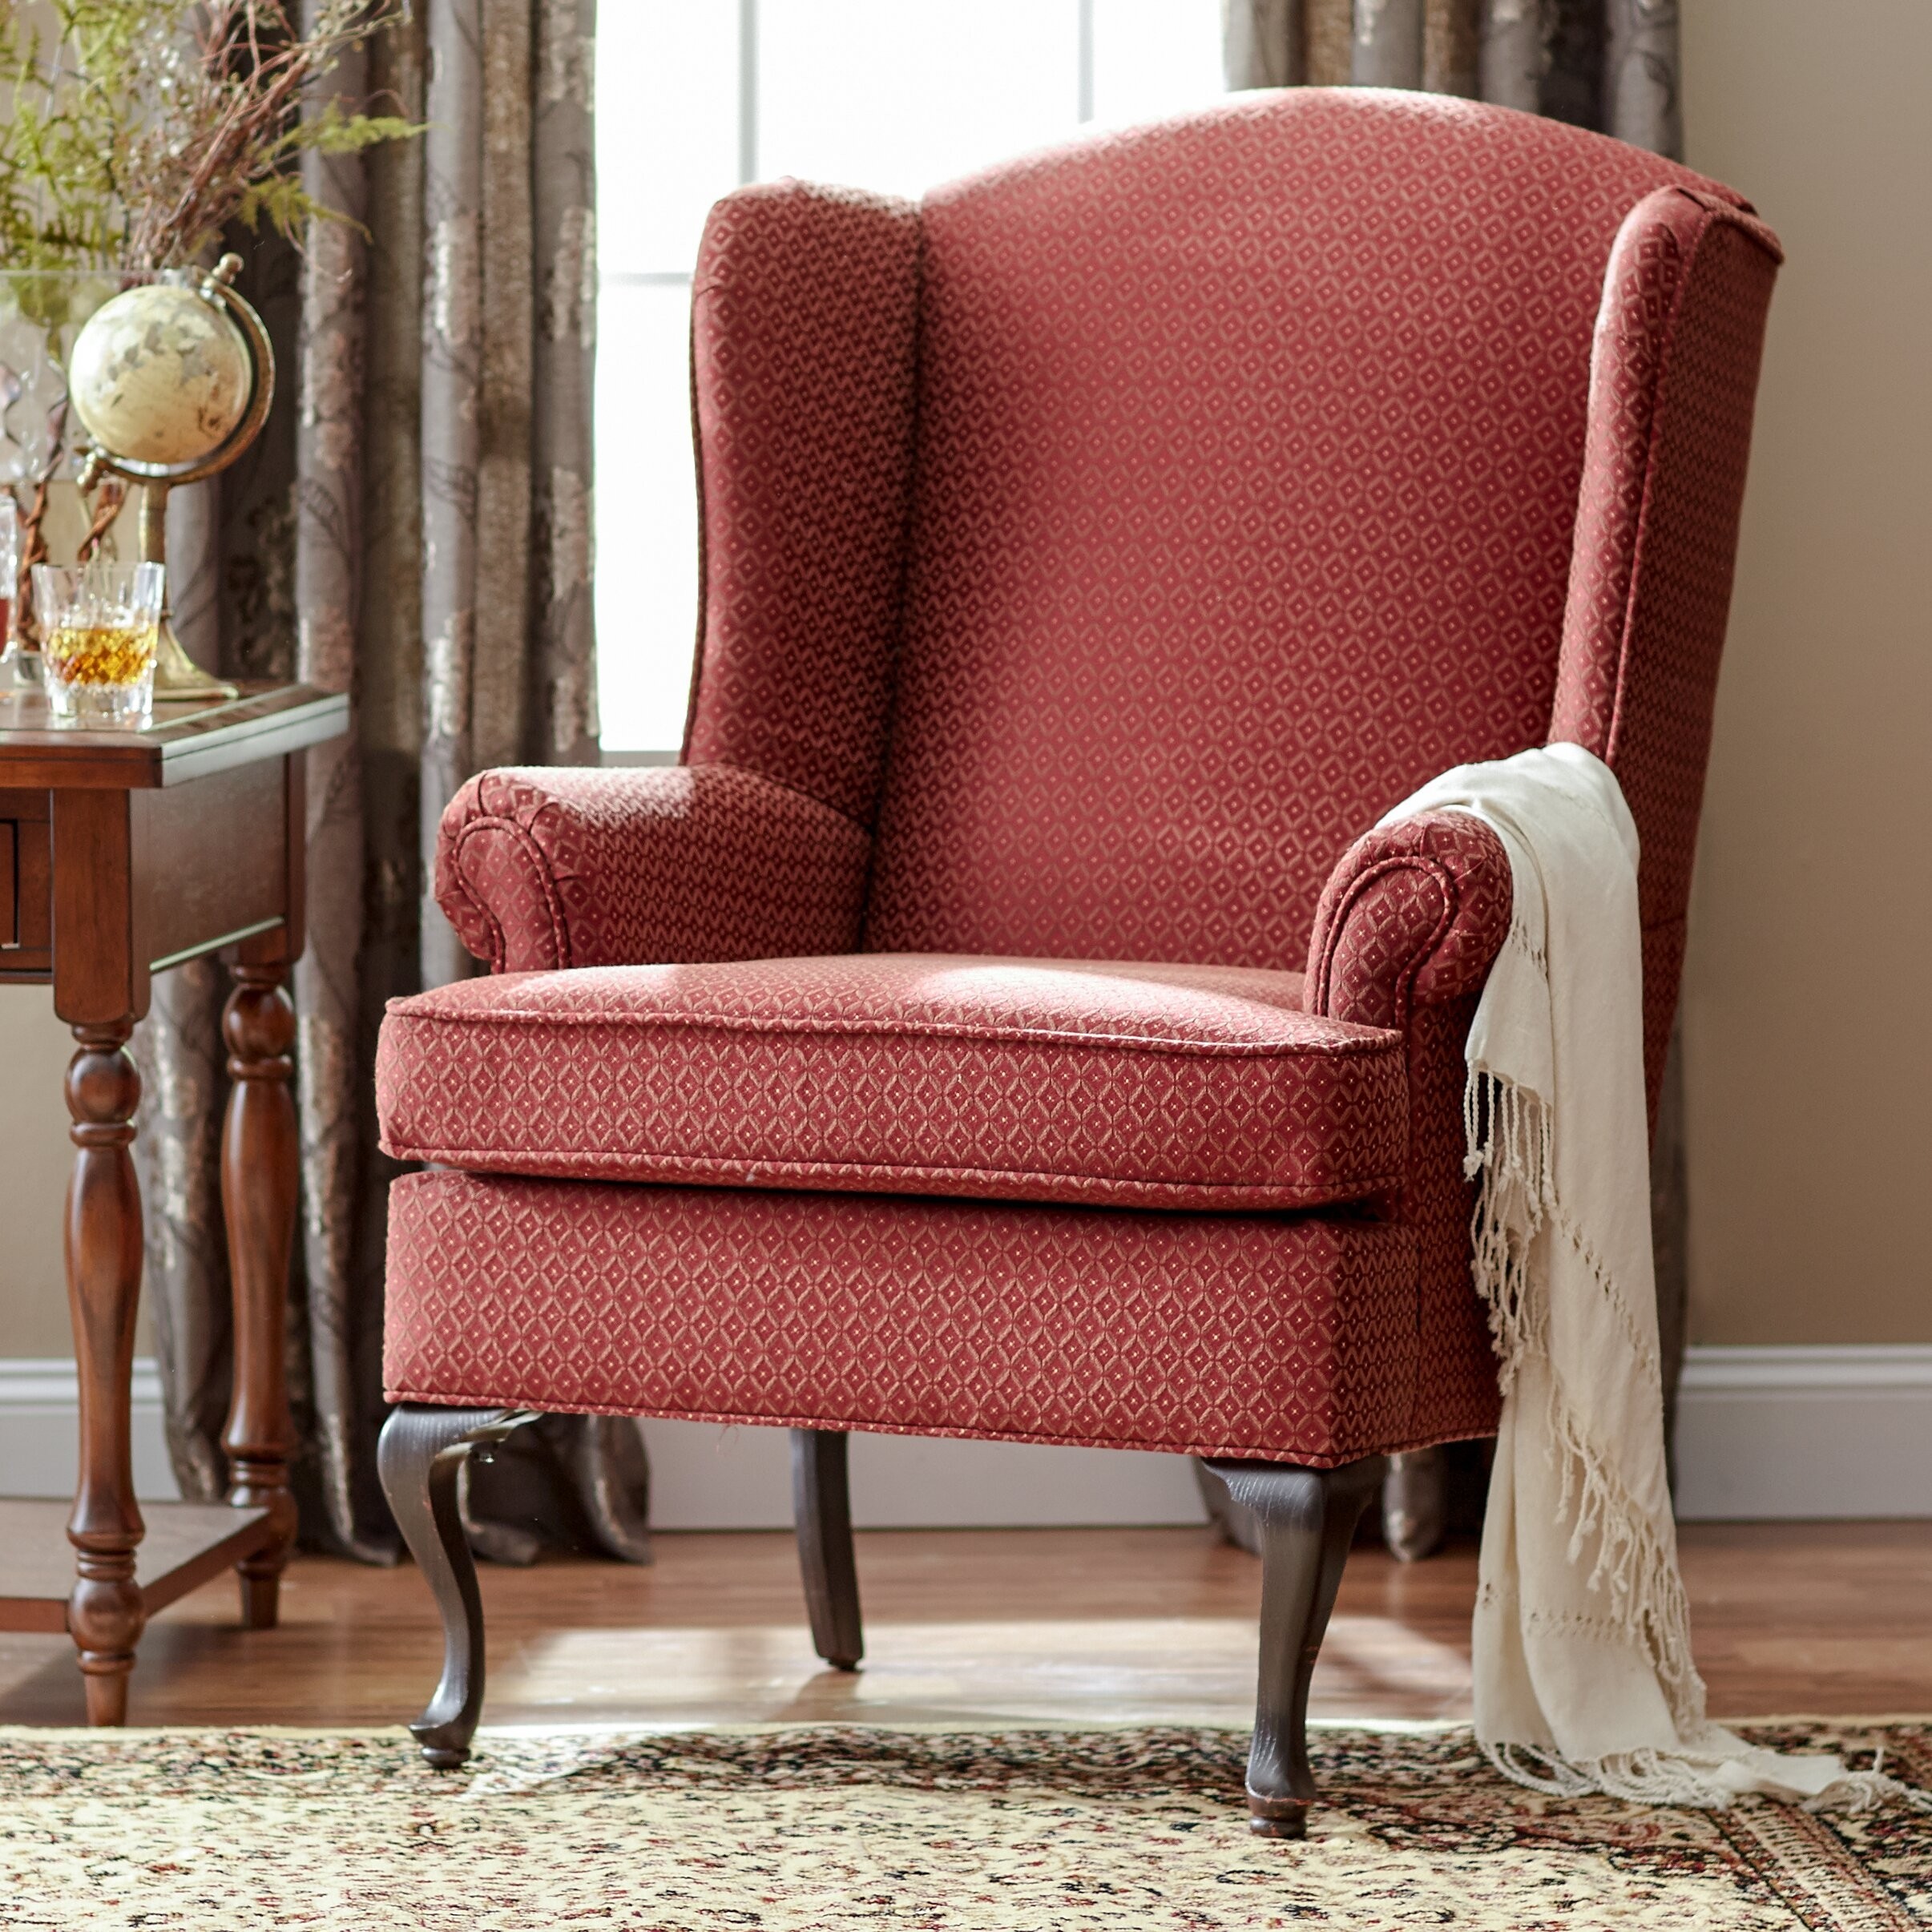 Damask Wingback Chair by Serta Upholstery